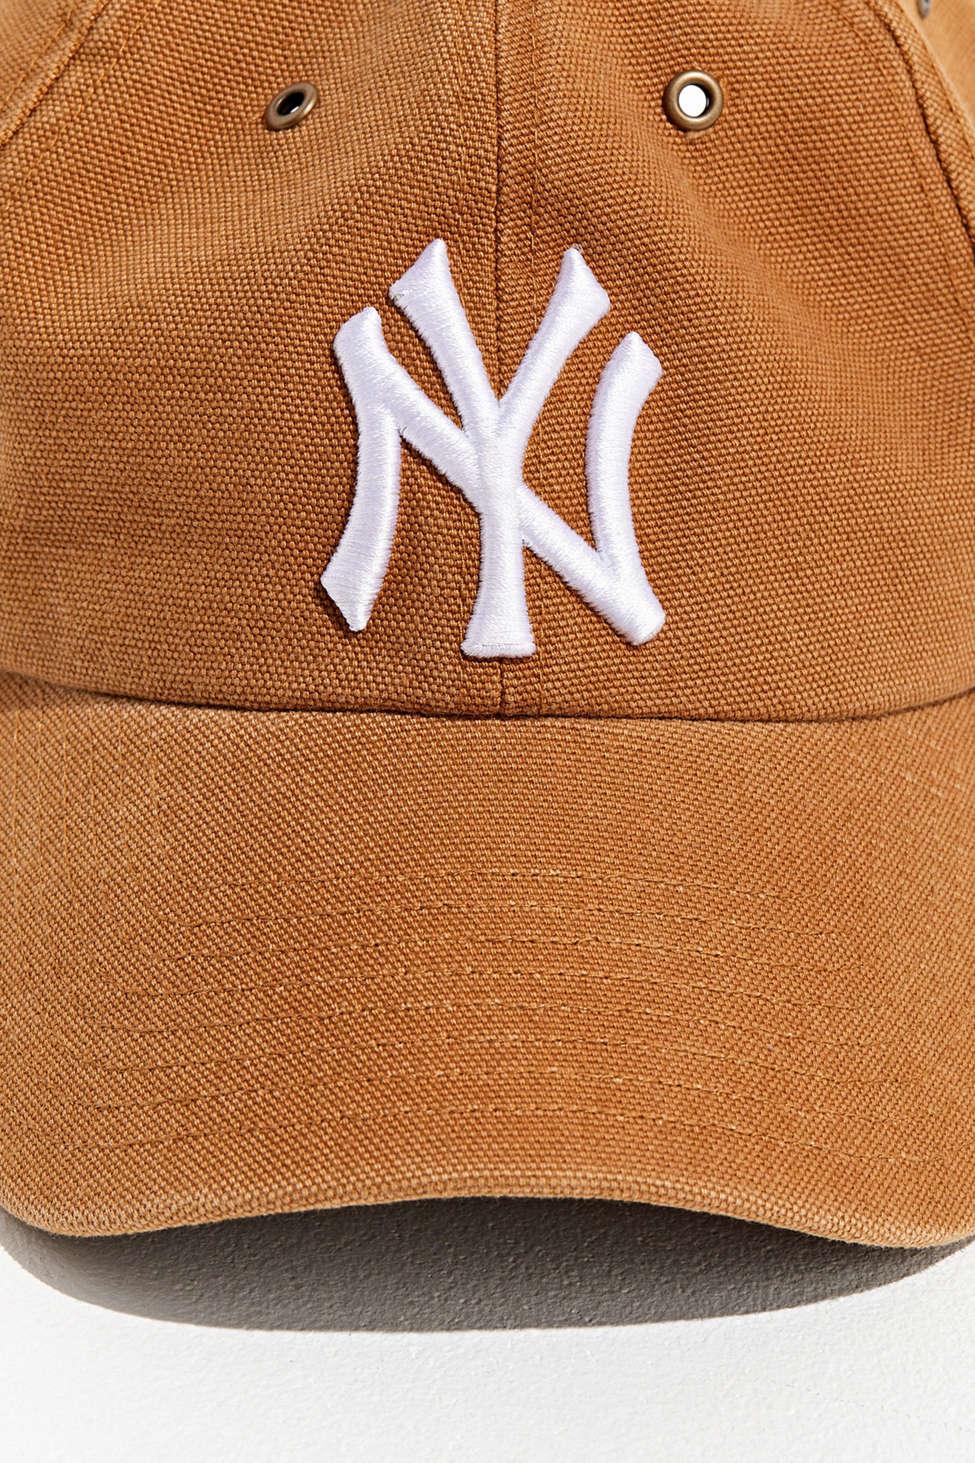 47 Brand Canvas X Carhartt New York Yankees Dad Baseball Hat in Brown for  Men - Lyst